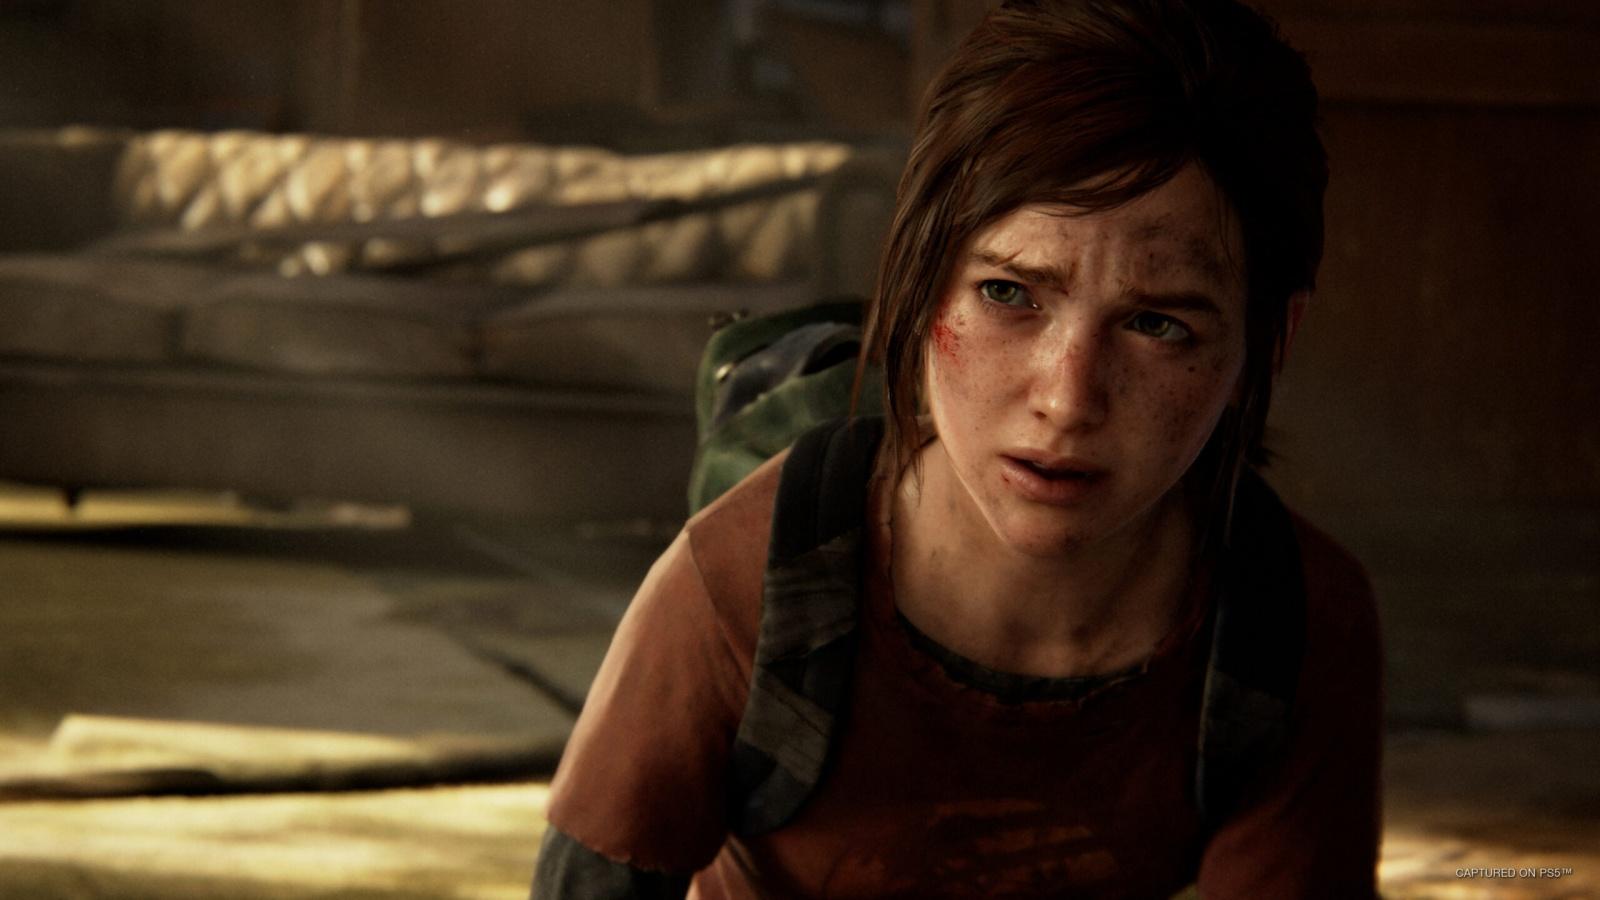 The Last of Us Part 1's PC port is launching very soon after the